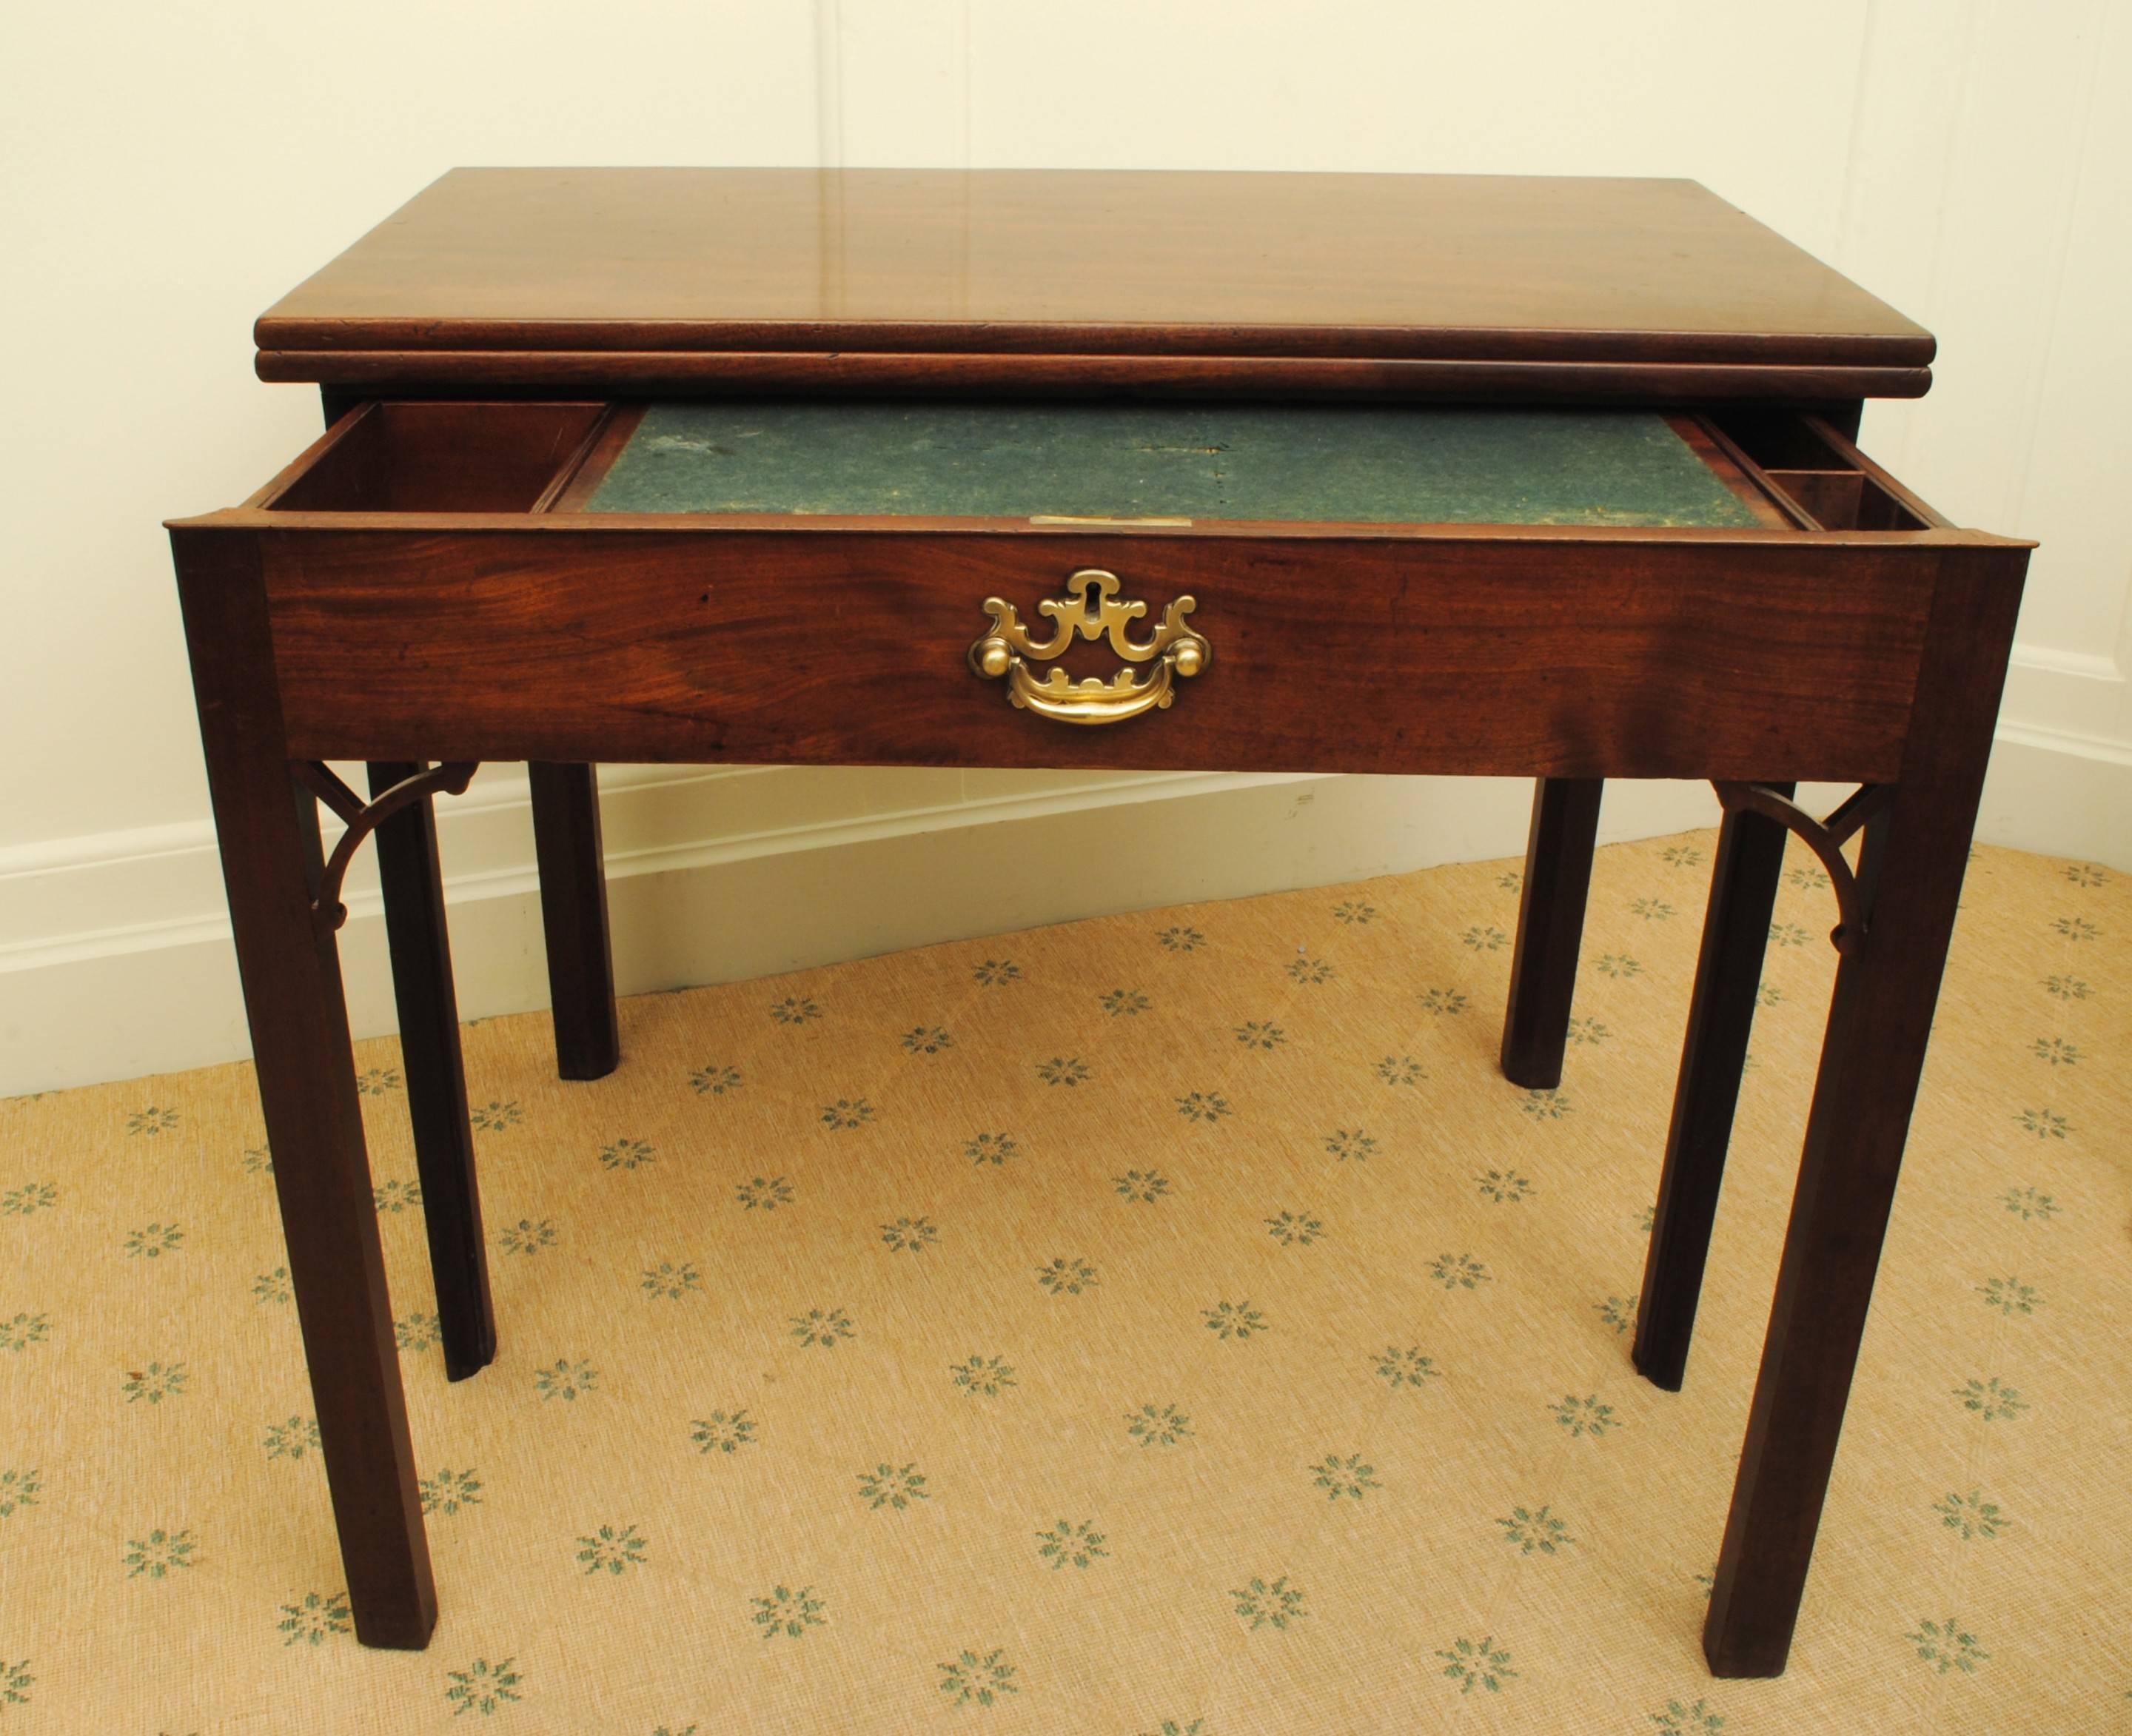 A mid 18th century mahogany table of good colour and patina, the fold over top making a large writing surface and the fitted drawer pulling out with half the front leg for support. Original brass handle.